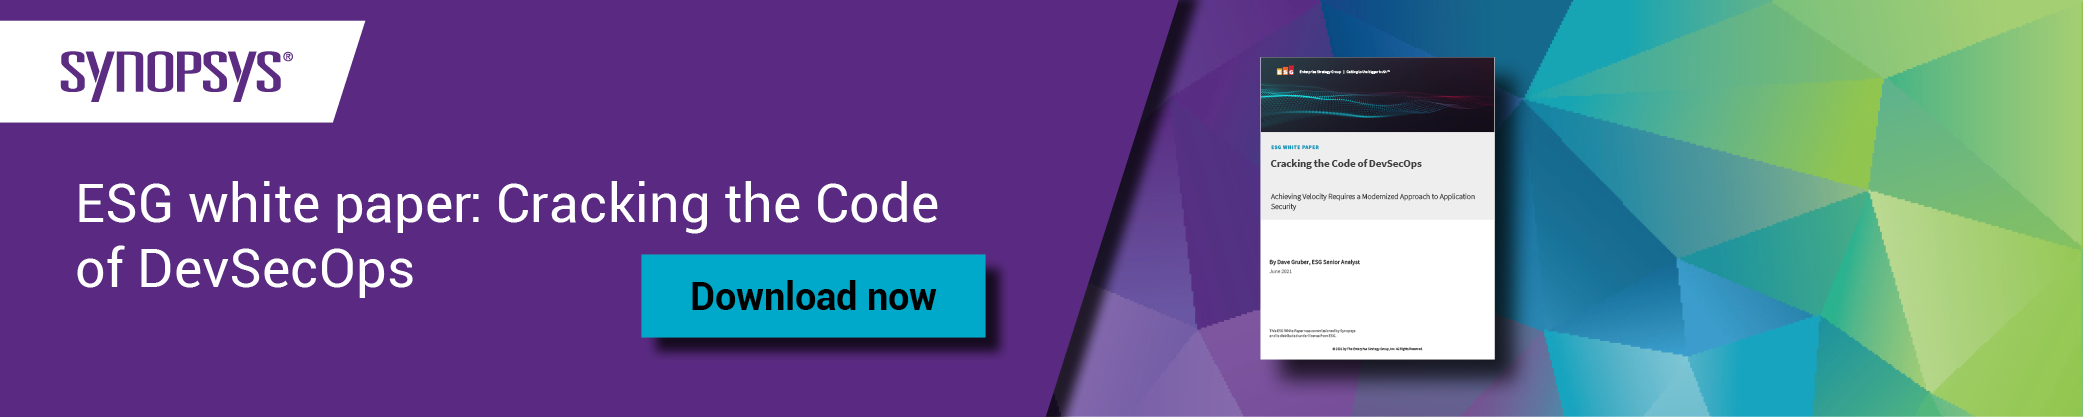 ESG white paper: Cracking the Code of DevSecOps | Synopsys